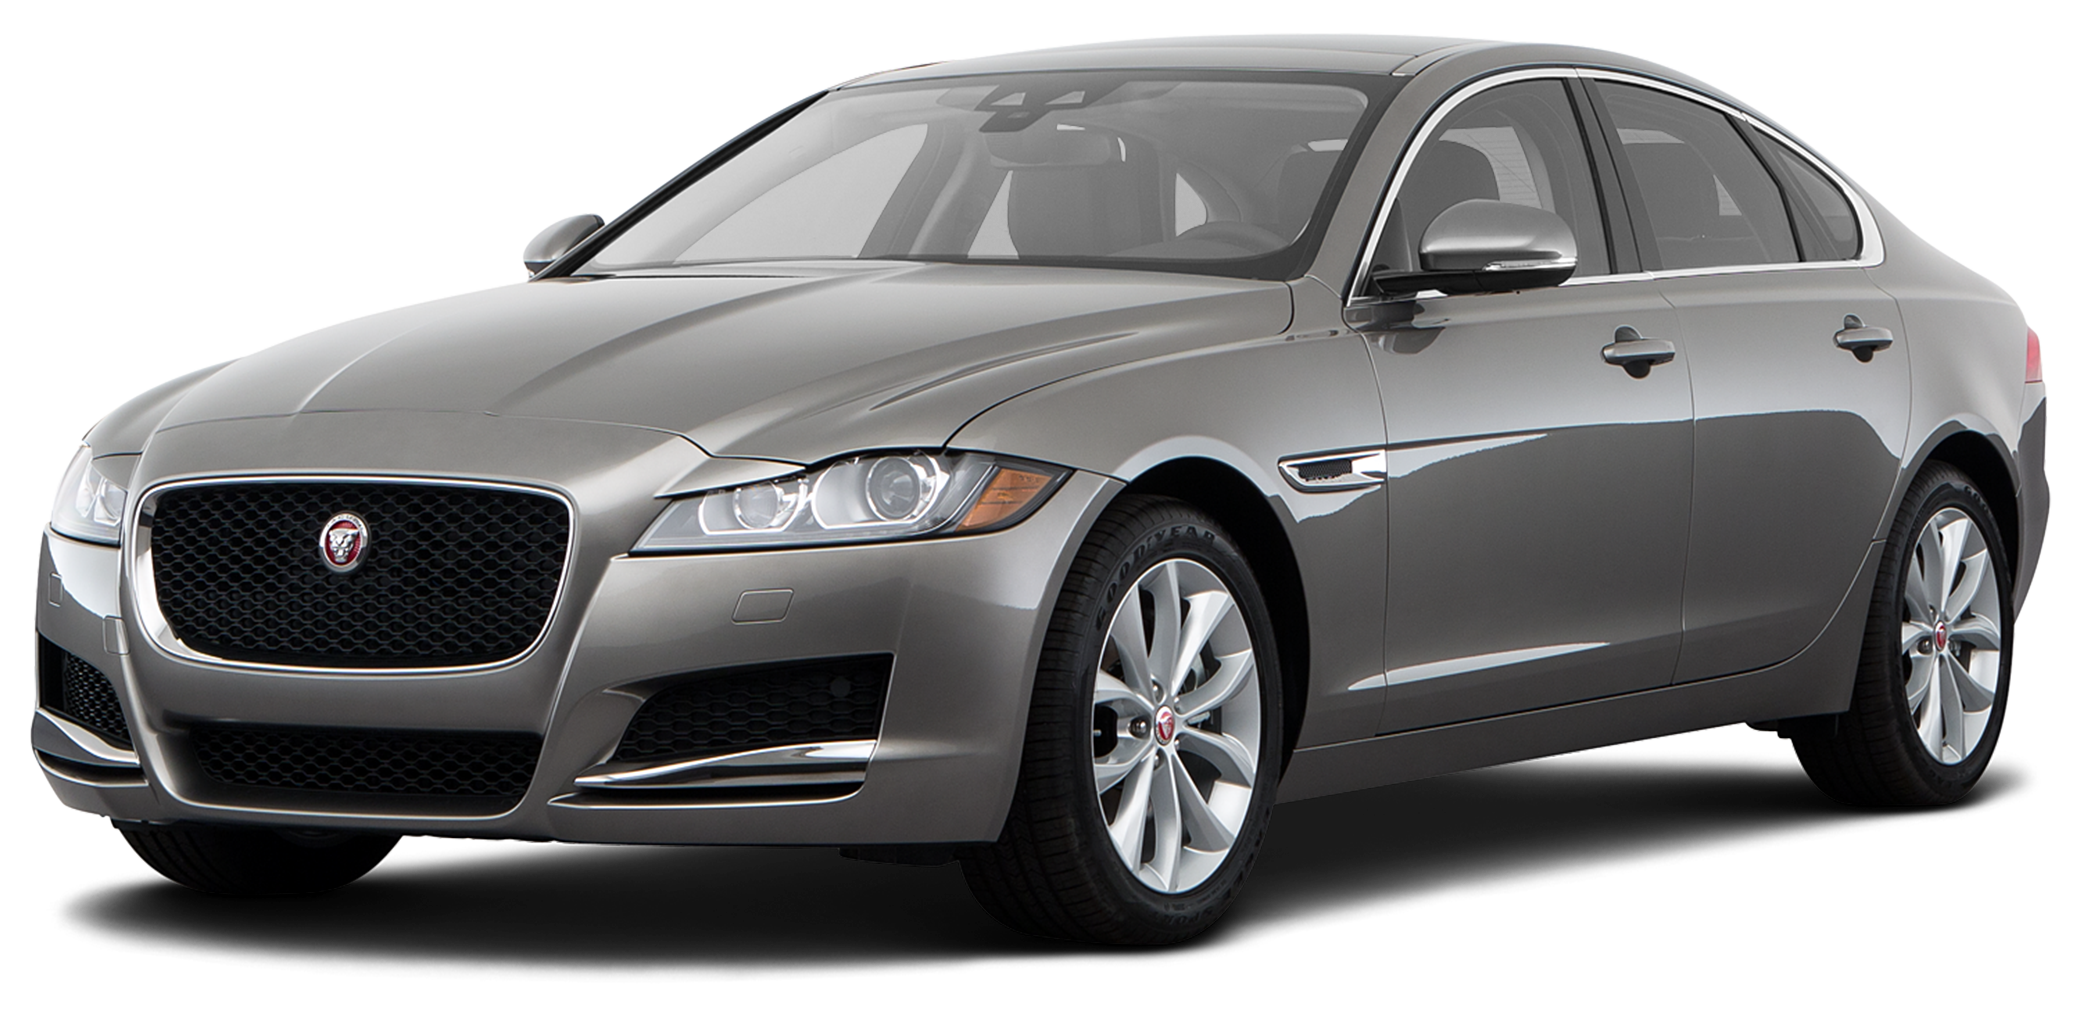 2019 Jaguar XF Incentives, Specials & Offers in Columbia SC